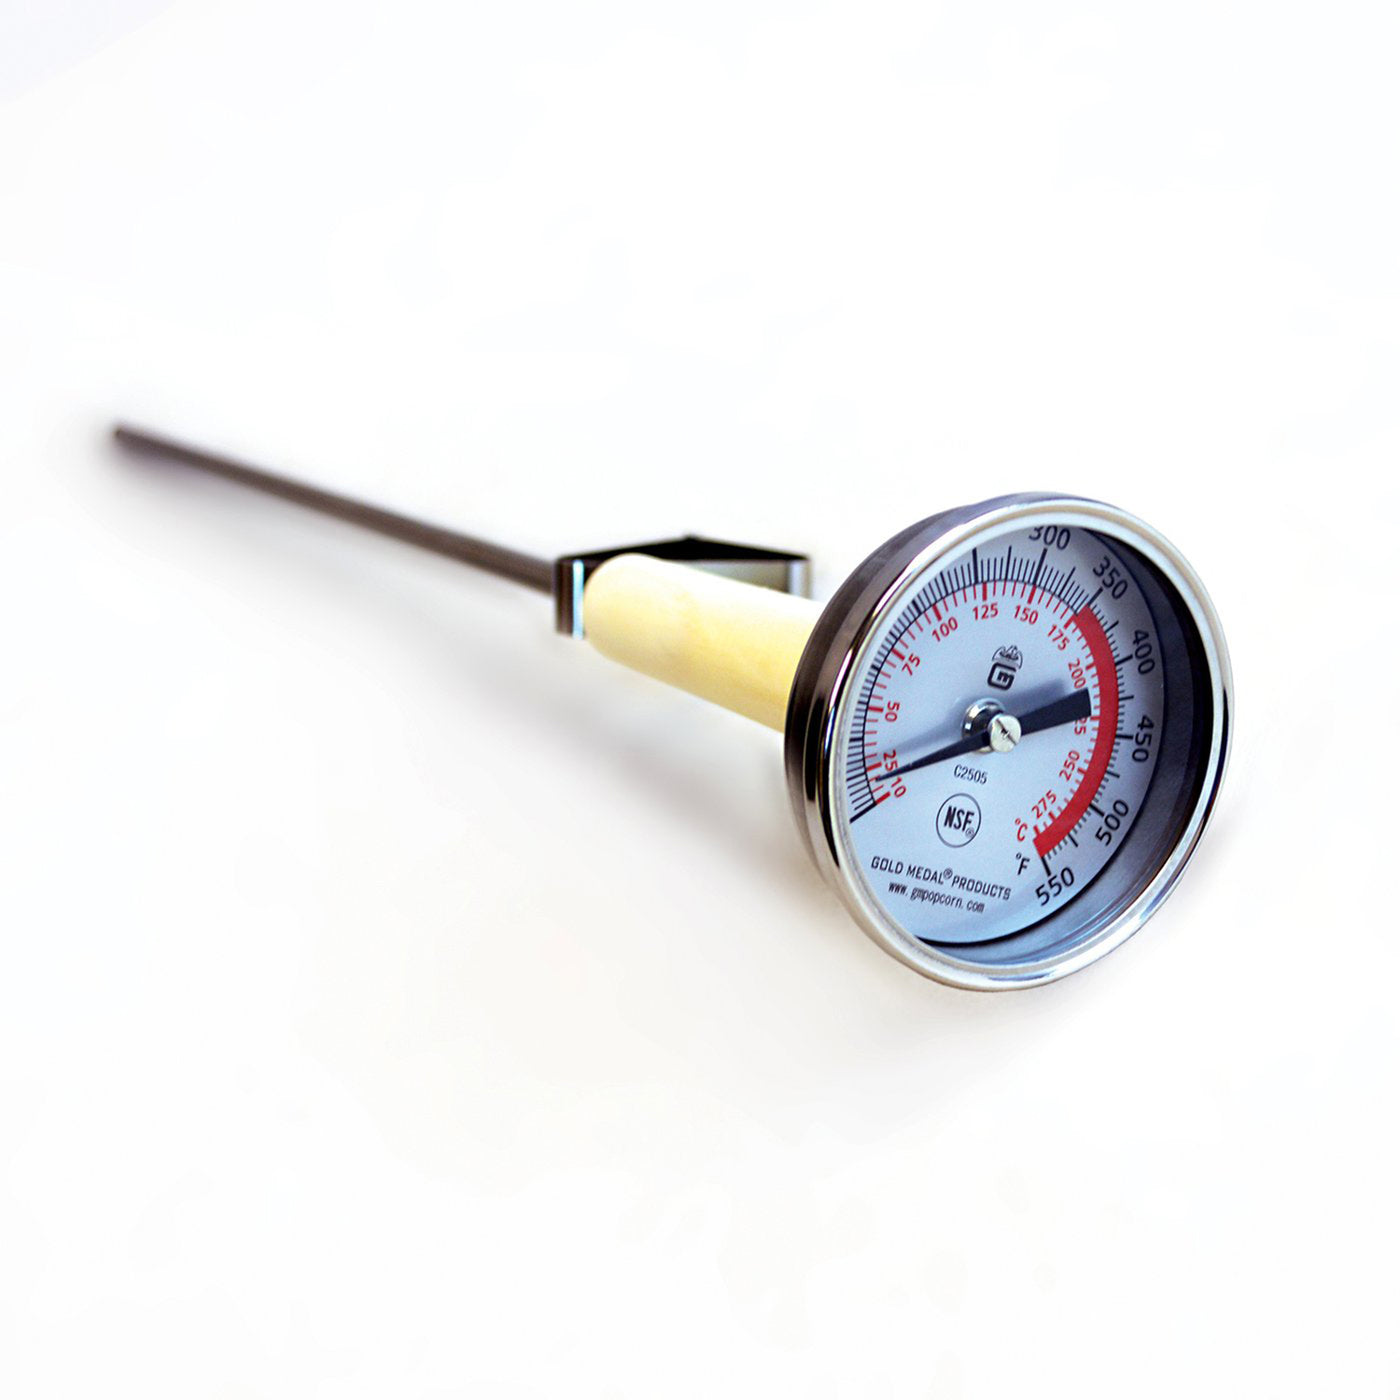 Candy Thermometer - Gold Medal #4300 – Gold Medal Products Co.